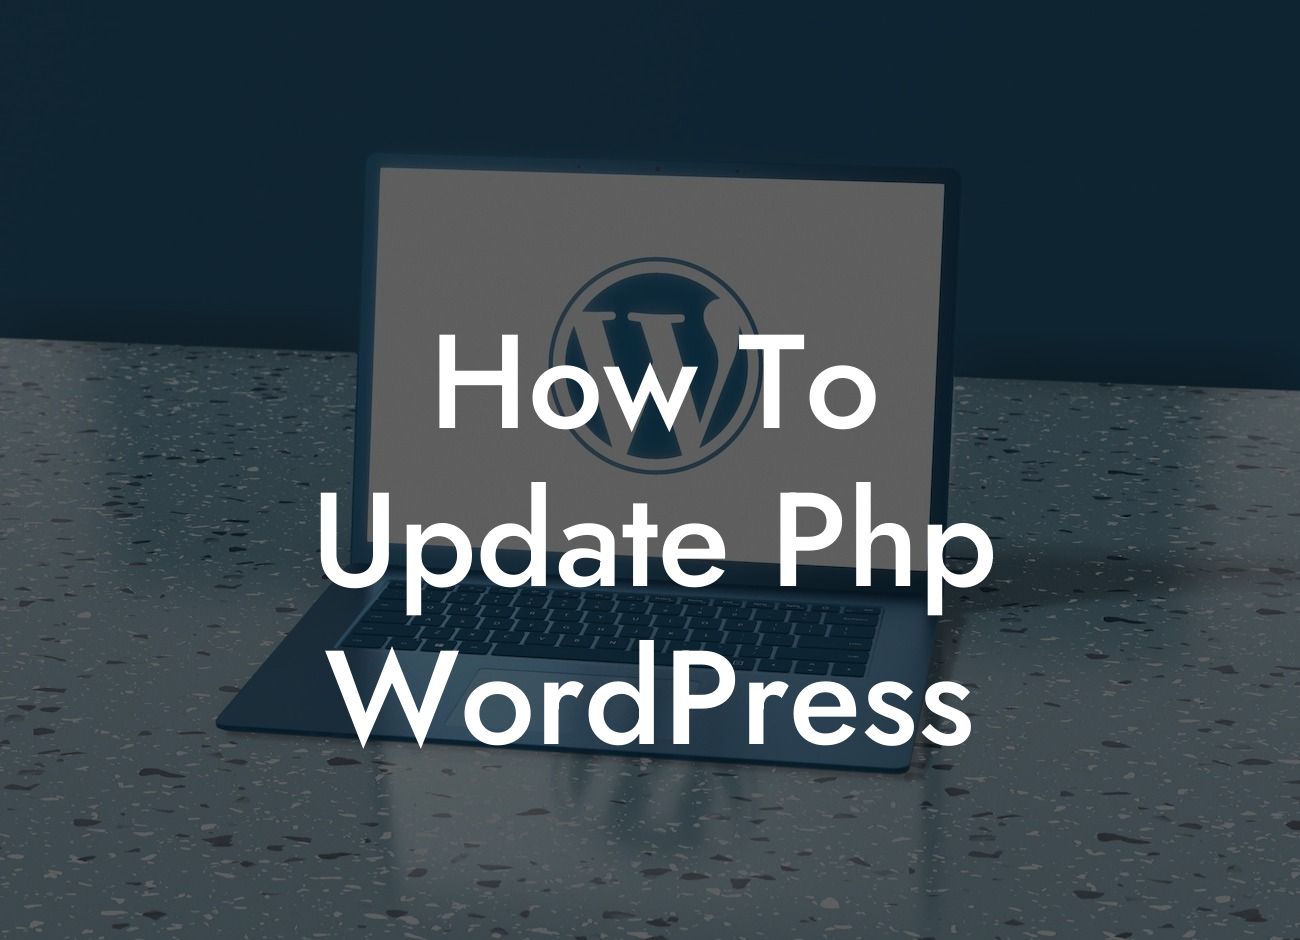 How To Update Php WordPress